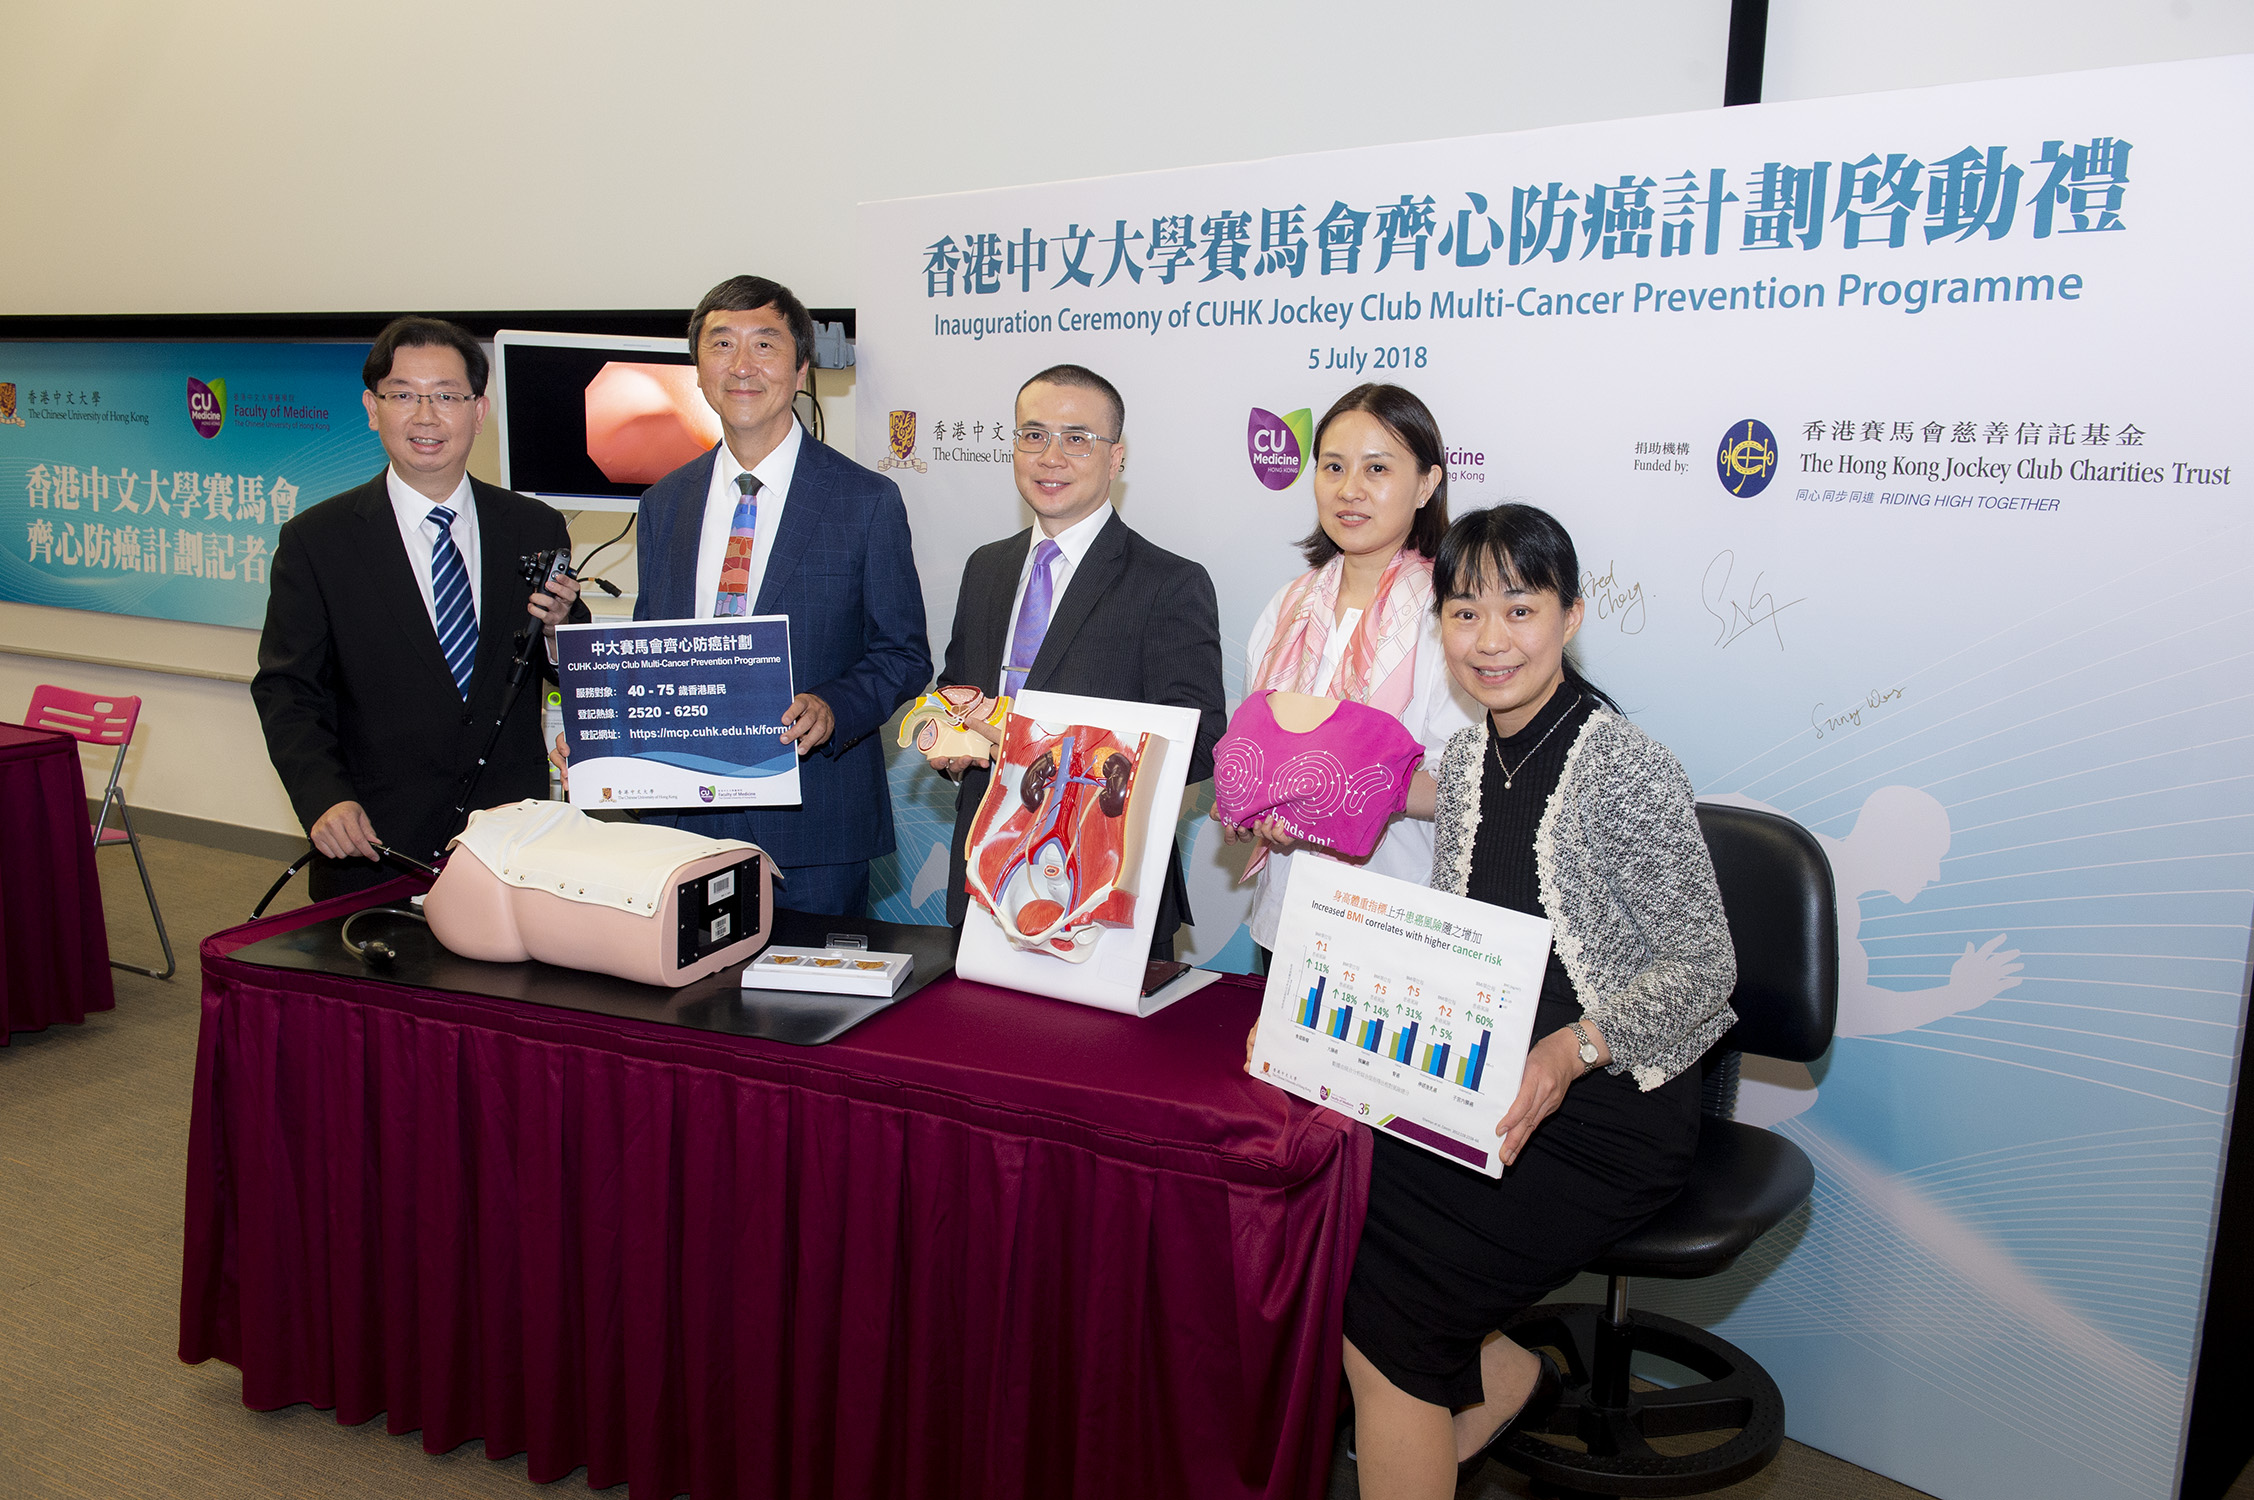 The Programme focuses on colorectal cancer, breast cancer and prostate cancer screening and provides the service free-of-charge to 10,000 Hong Kong residents aged between 40 and 75.